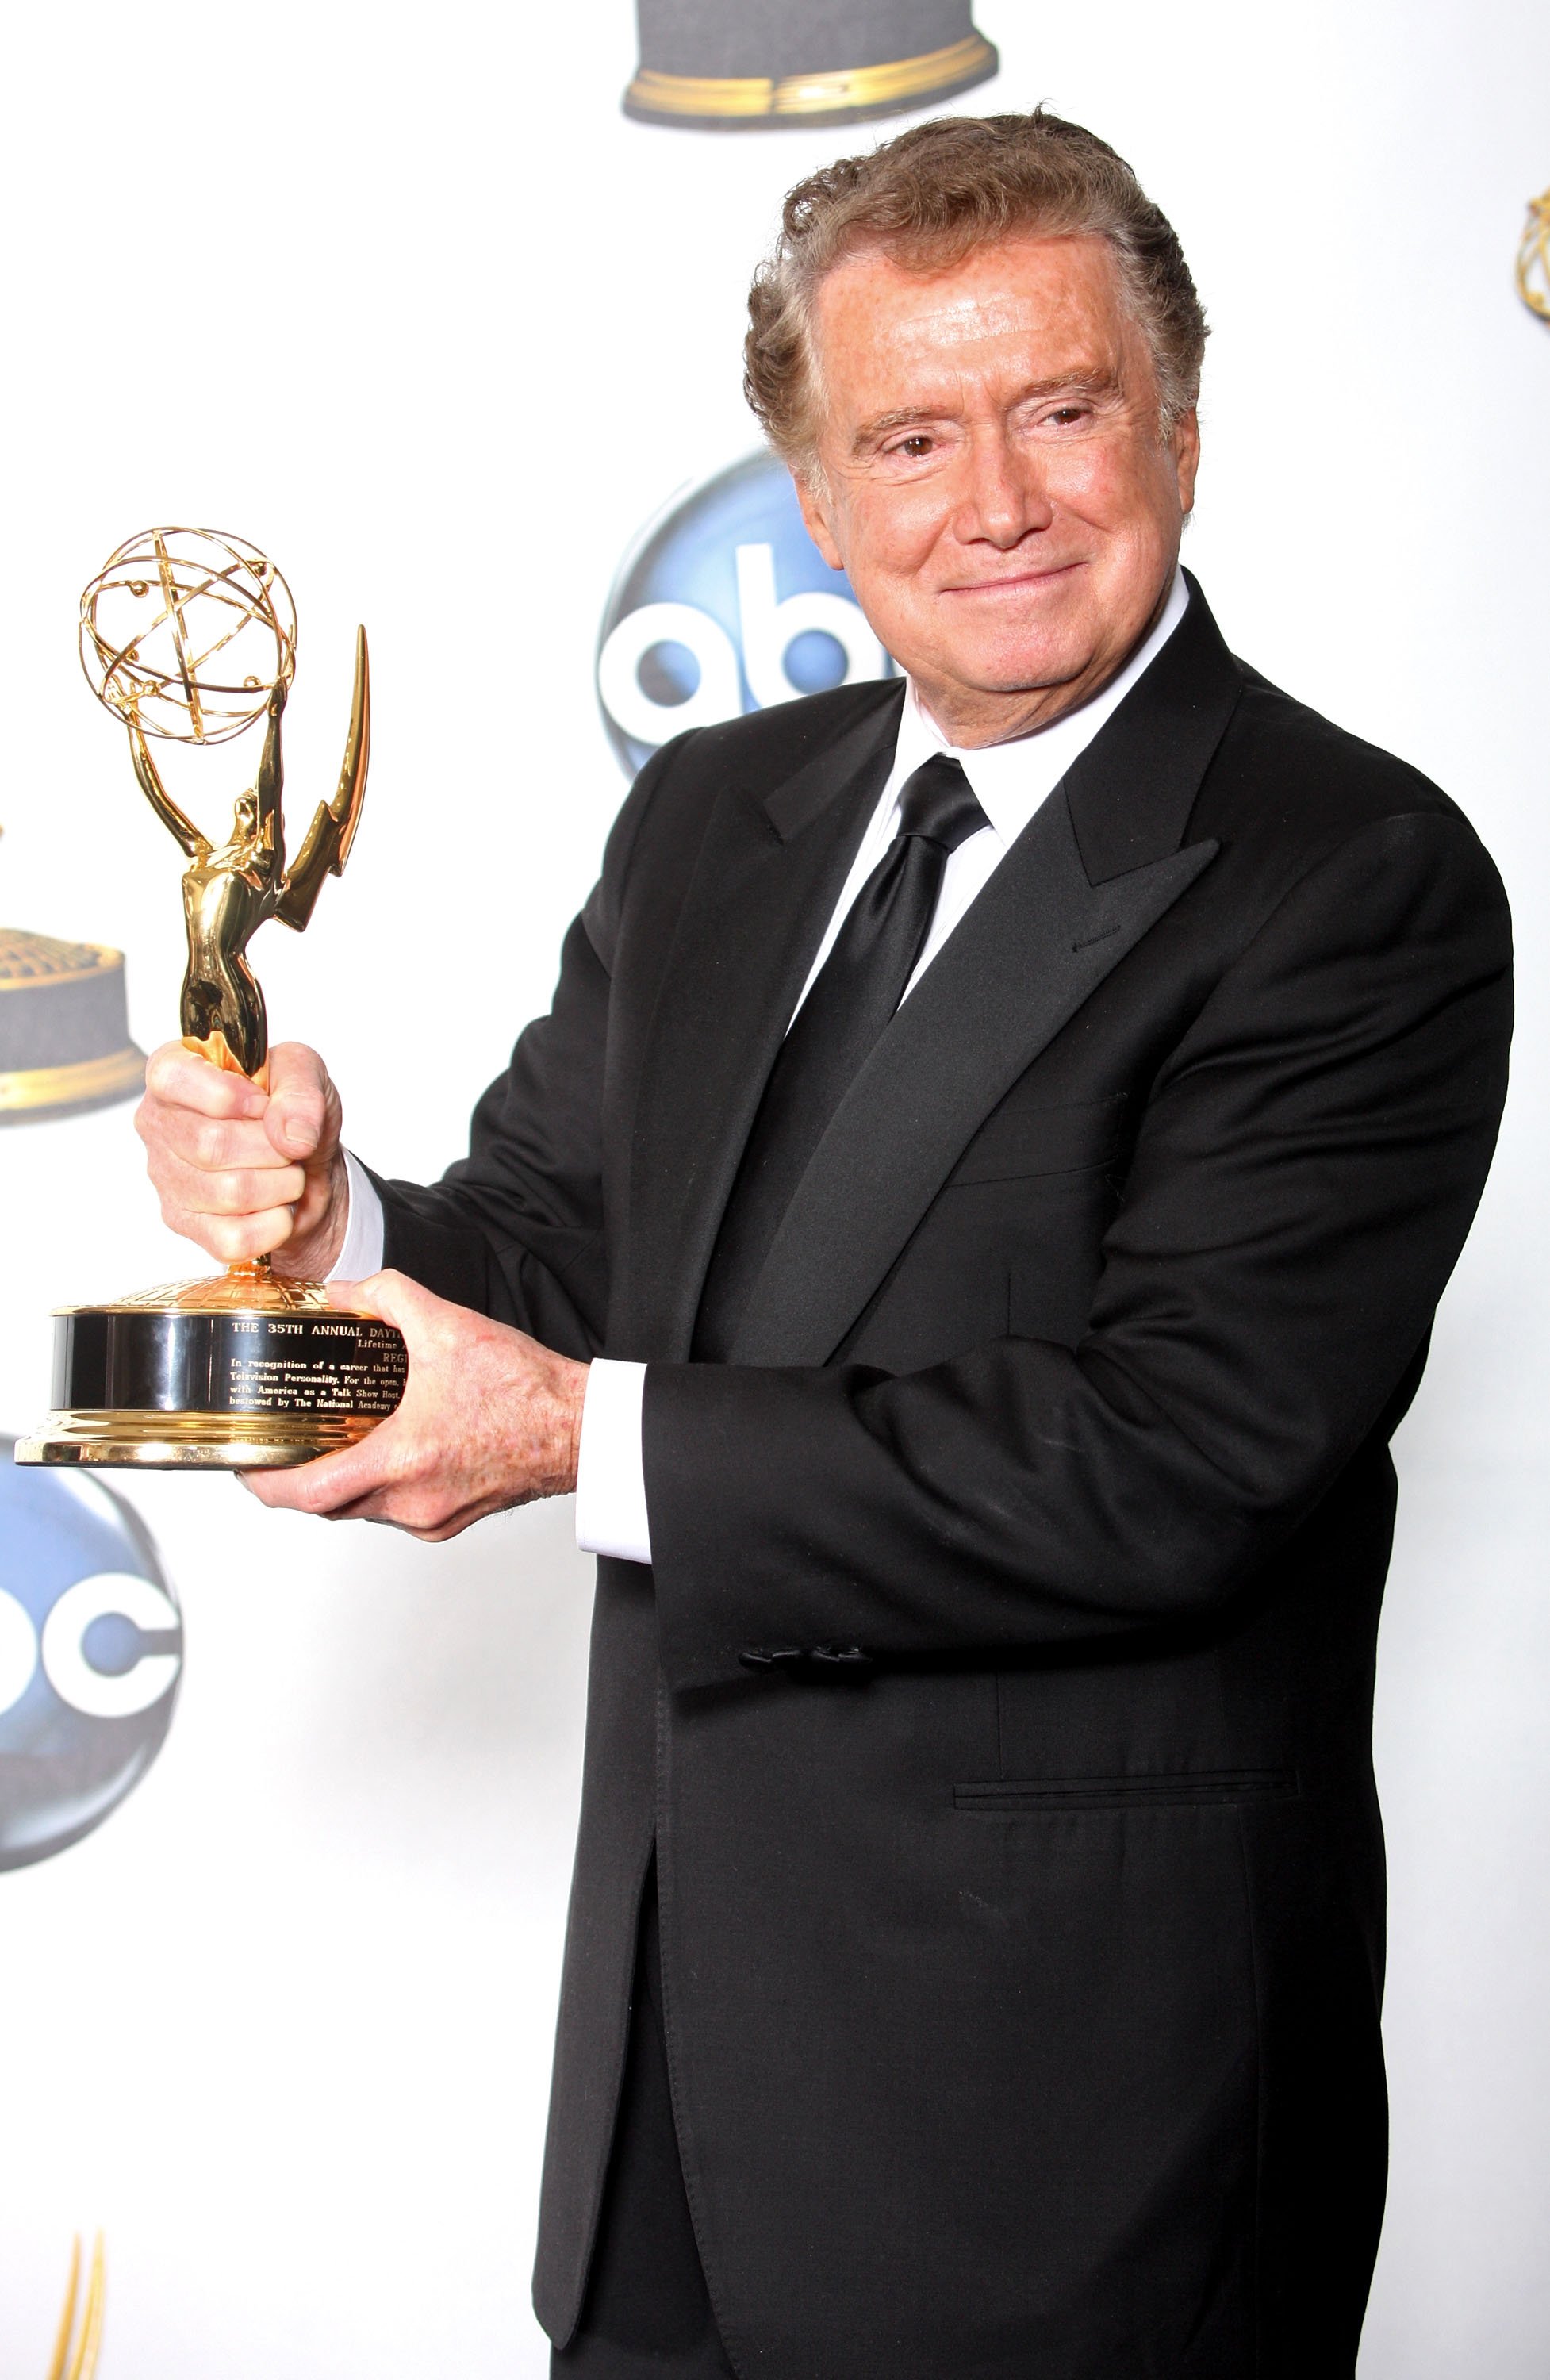 Regis Philbin as he received the Lifetime Achievement Award at the 35th Annual Daytime Emmy Awards on June 20, 2008 | Source: Getty Images